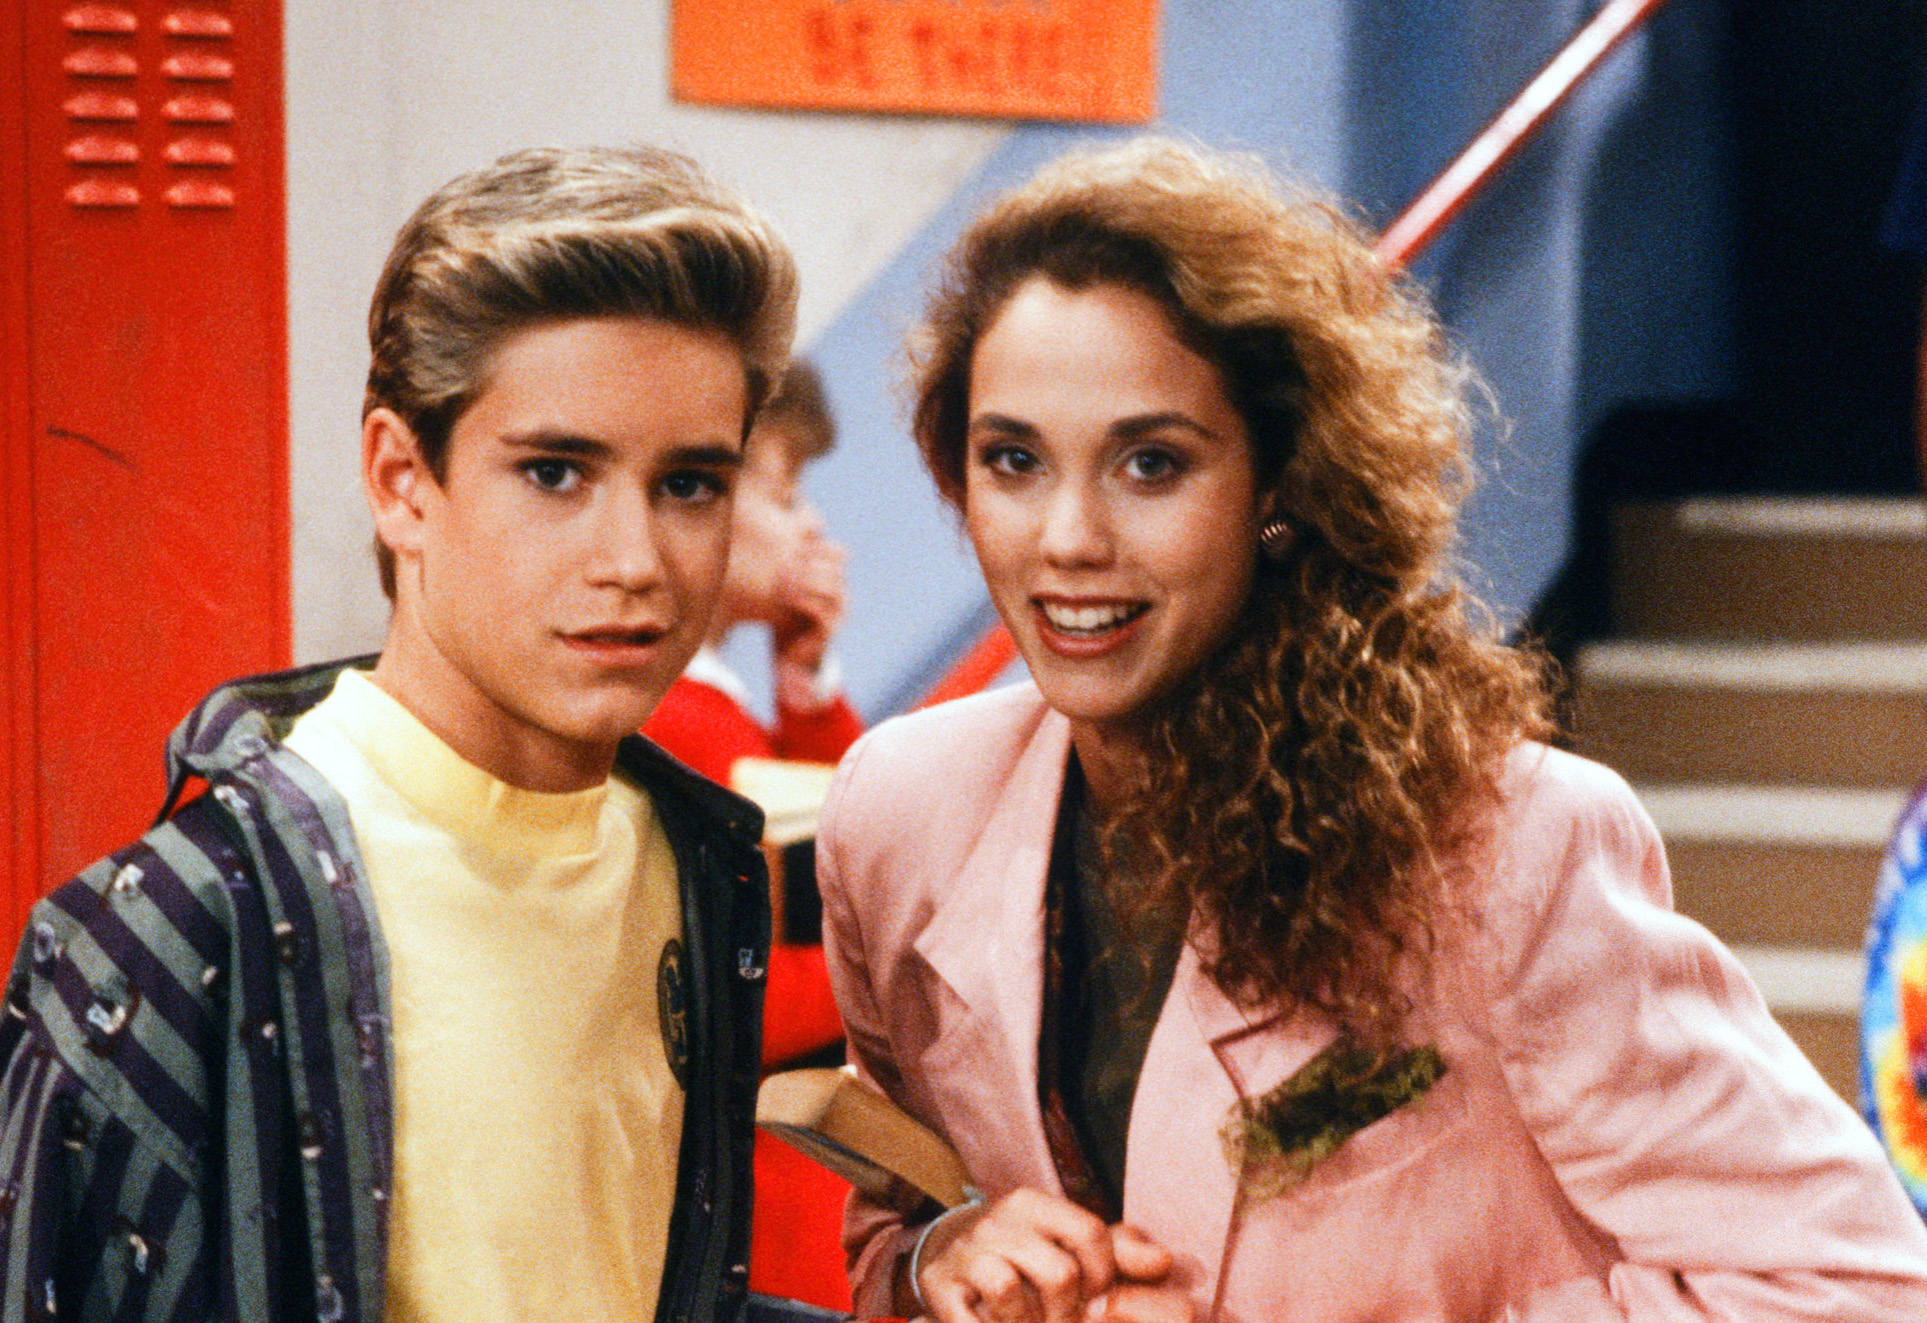 Saved by the Bell - Season 1